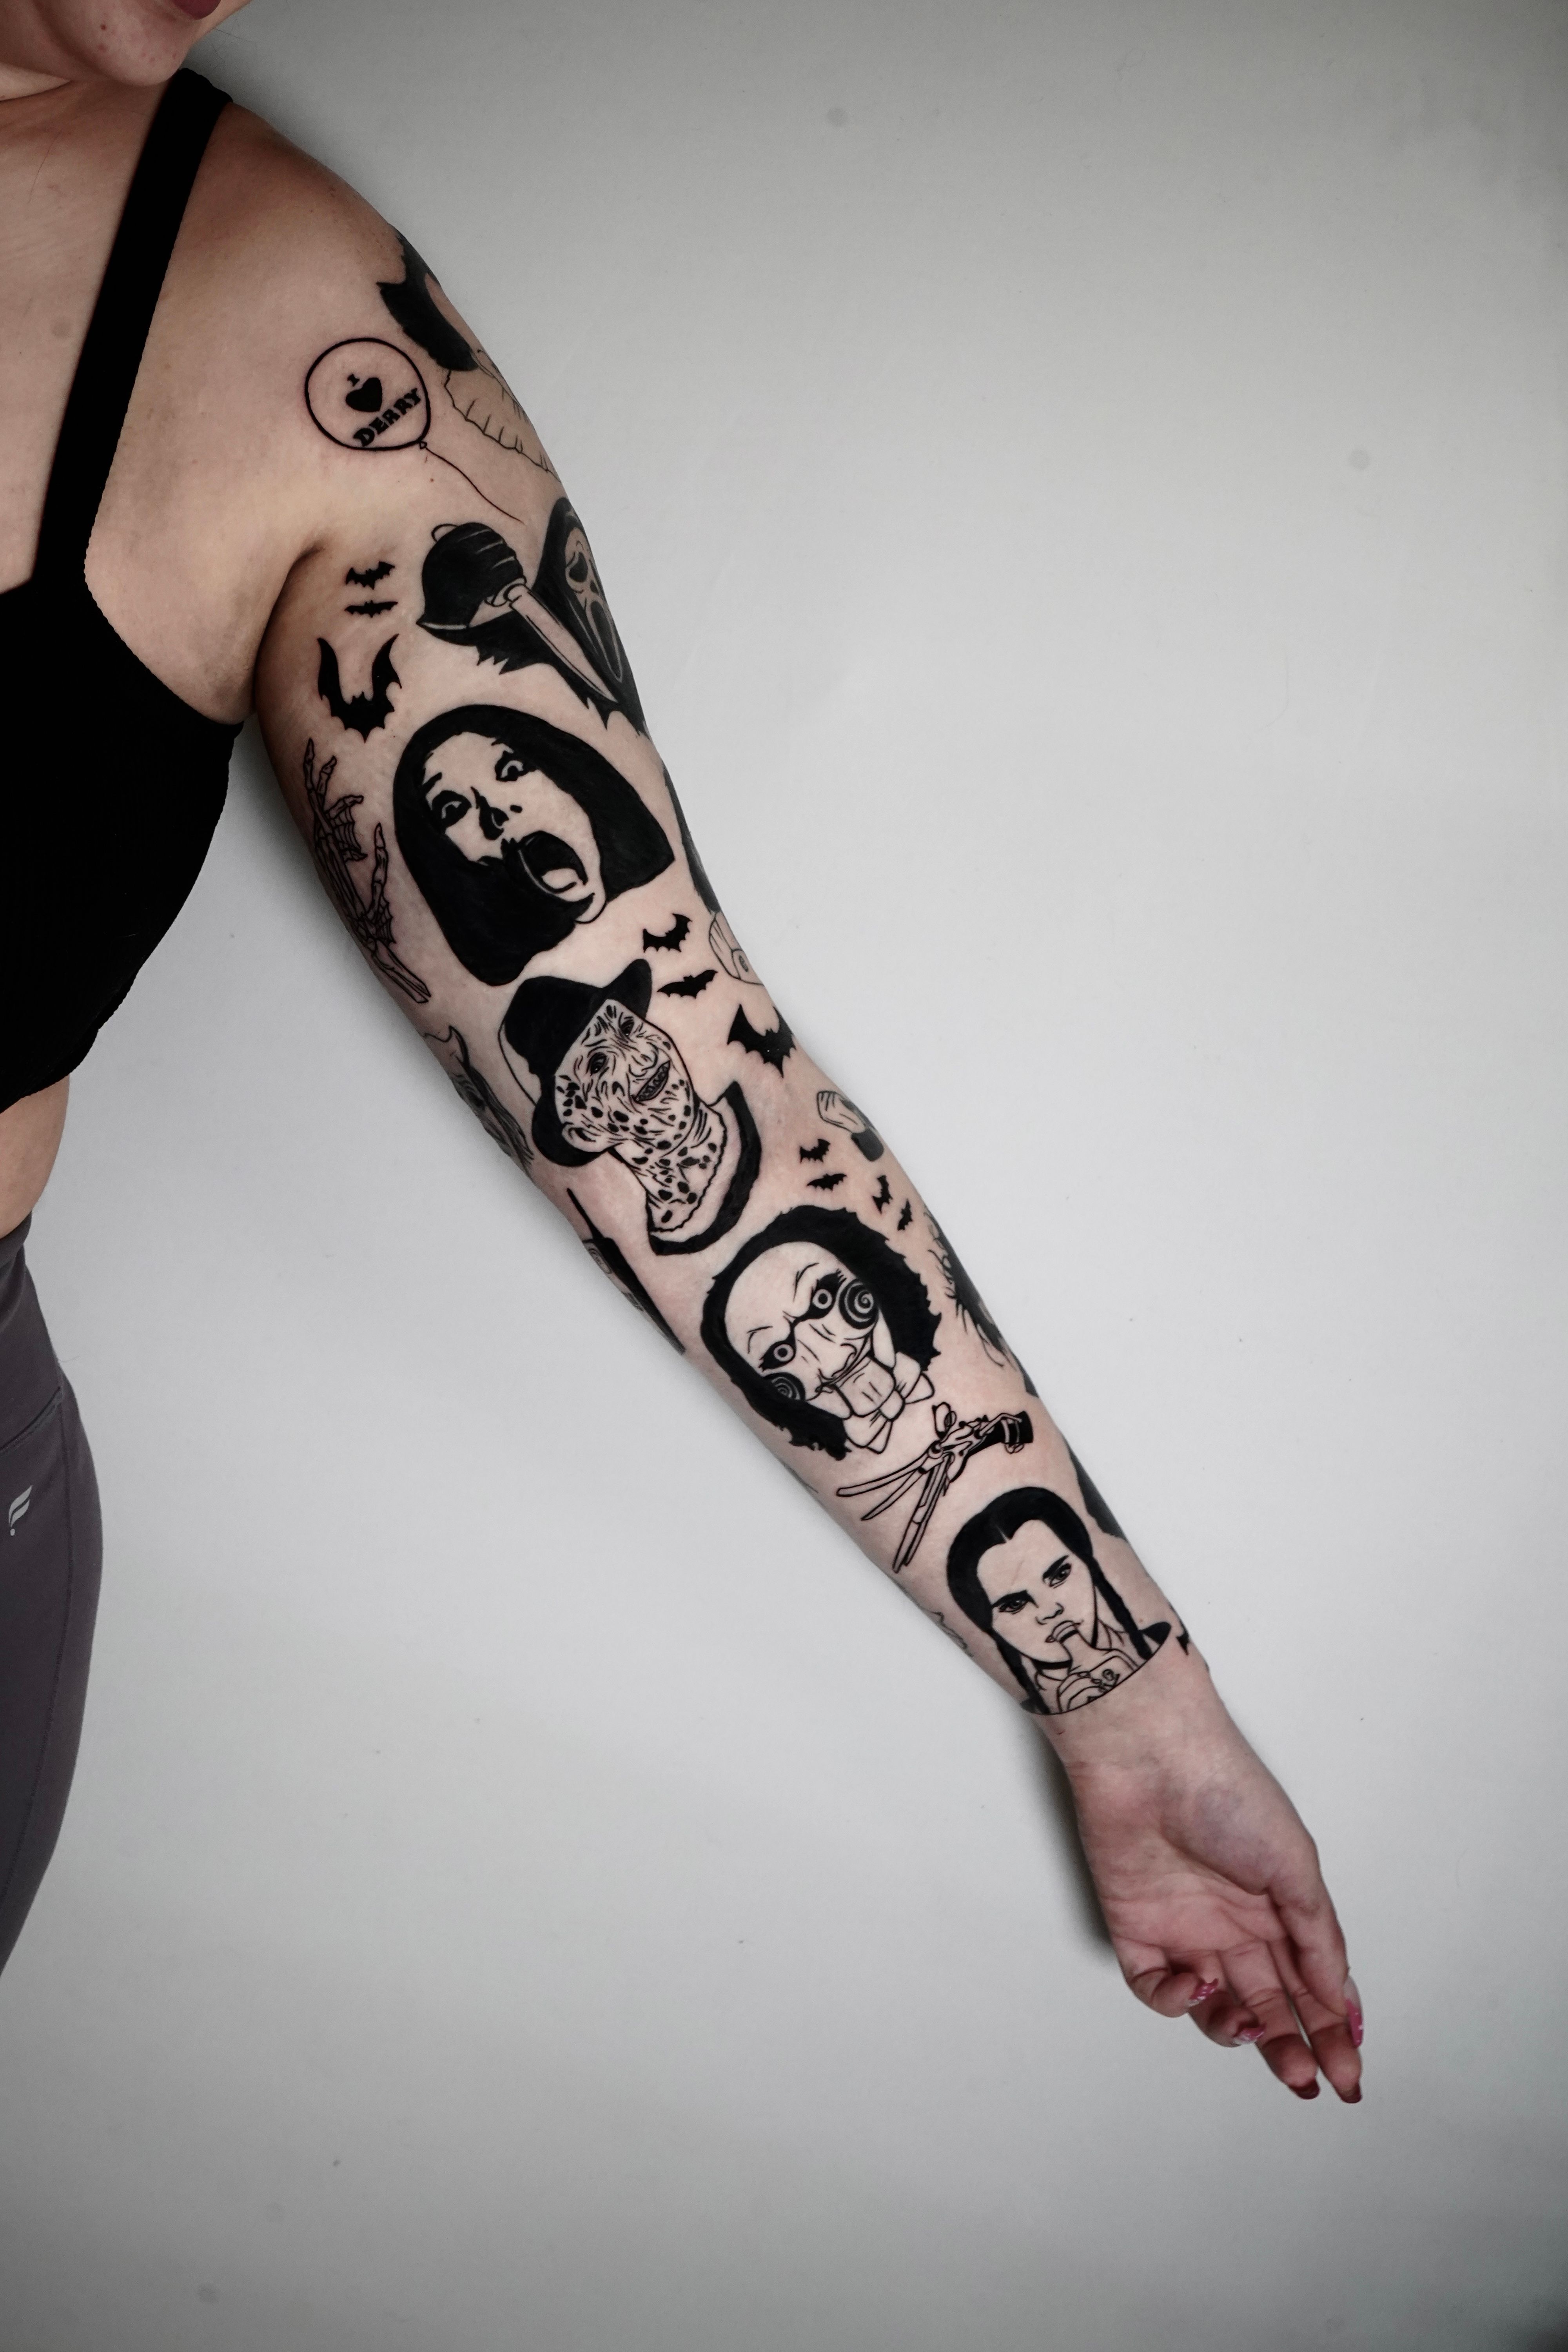 Inked Magazine Men | Cool arm tattoos, Arm tattoos for guys, Scary tattoos